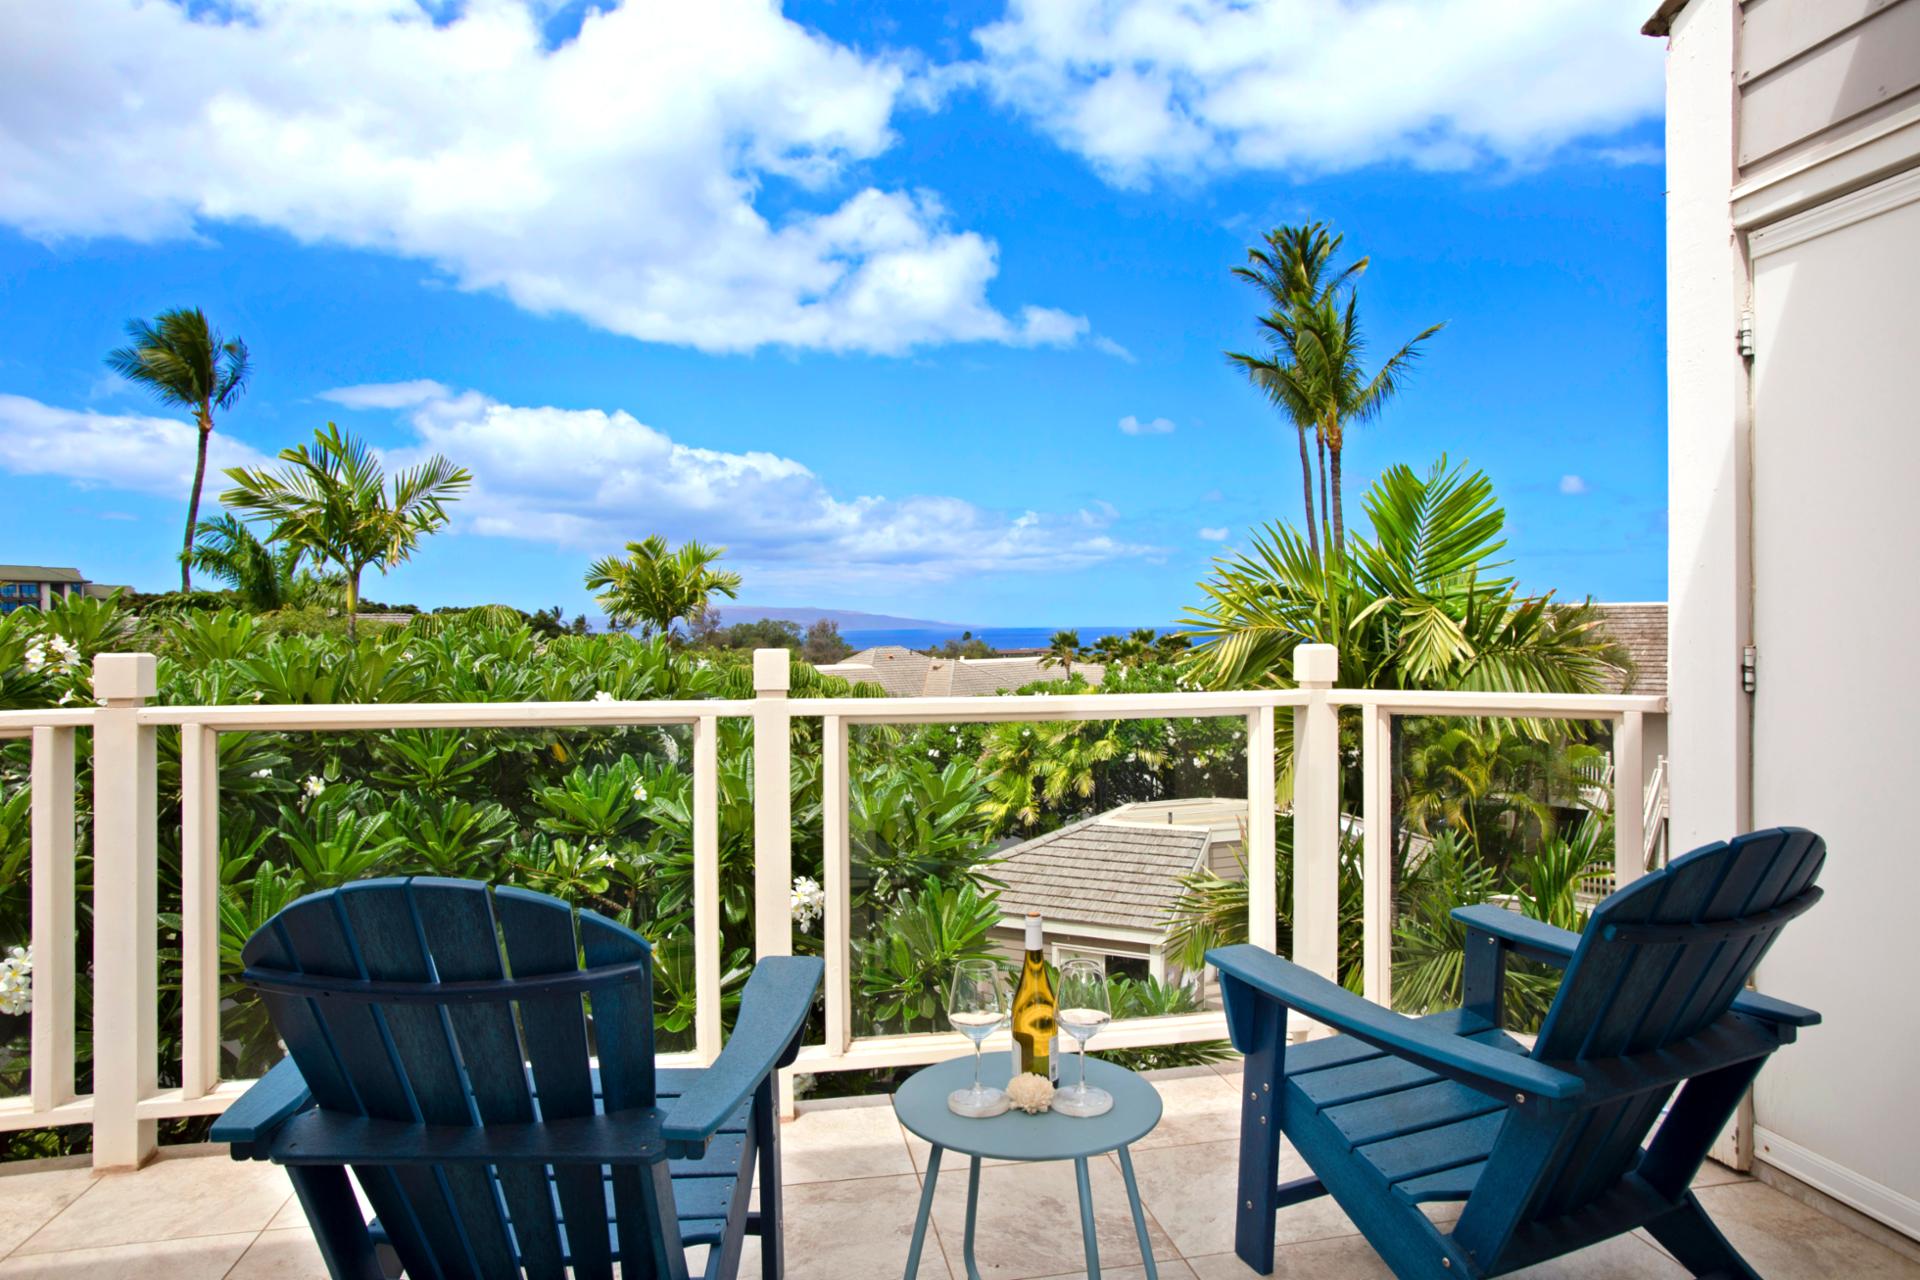 Property Image 2 - Property Manager: Grand Champions GCH-42, Remodeled 2 Bd Villa in Heart of Wailea, Includes Rental Car!